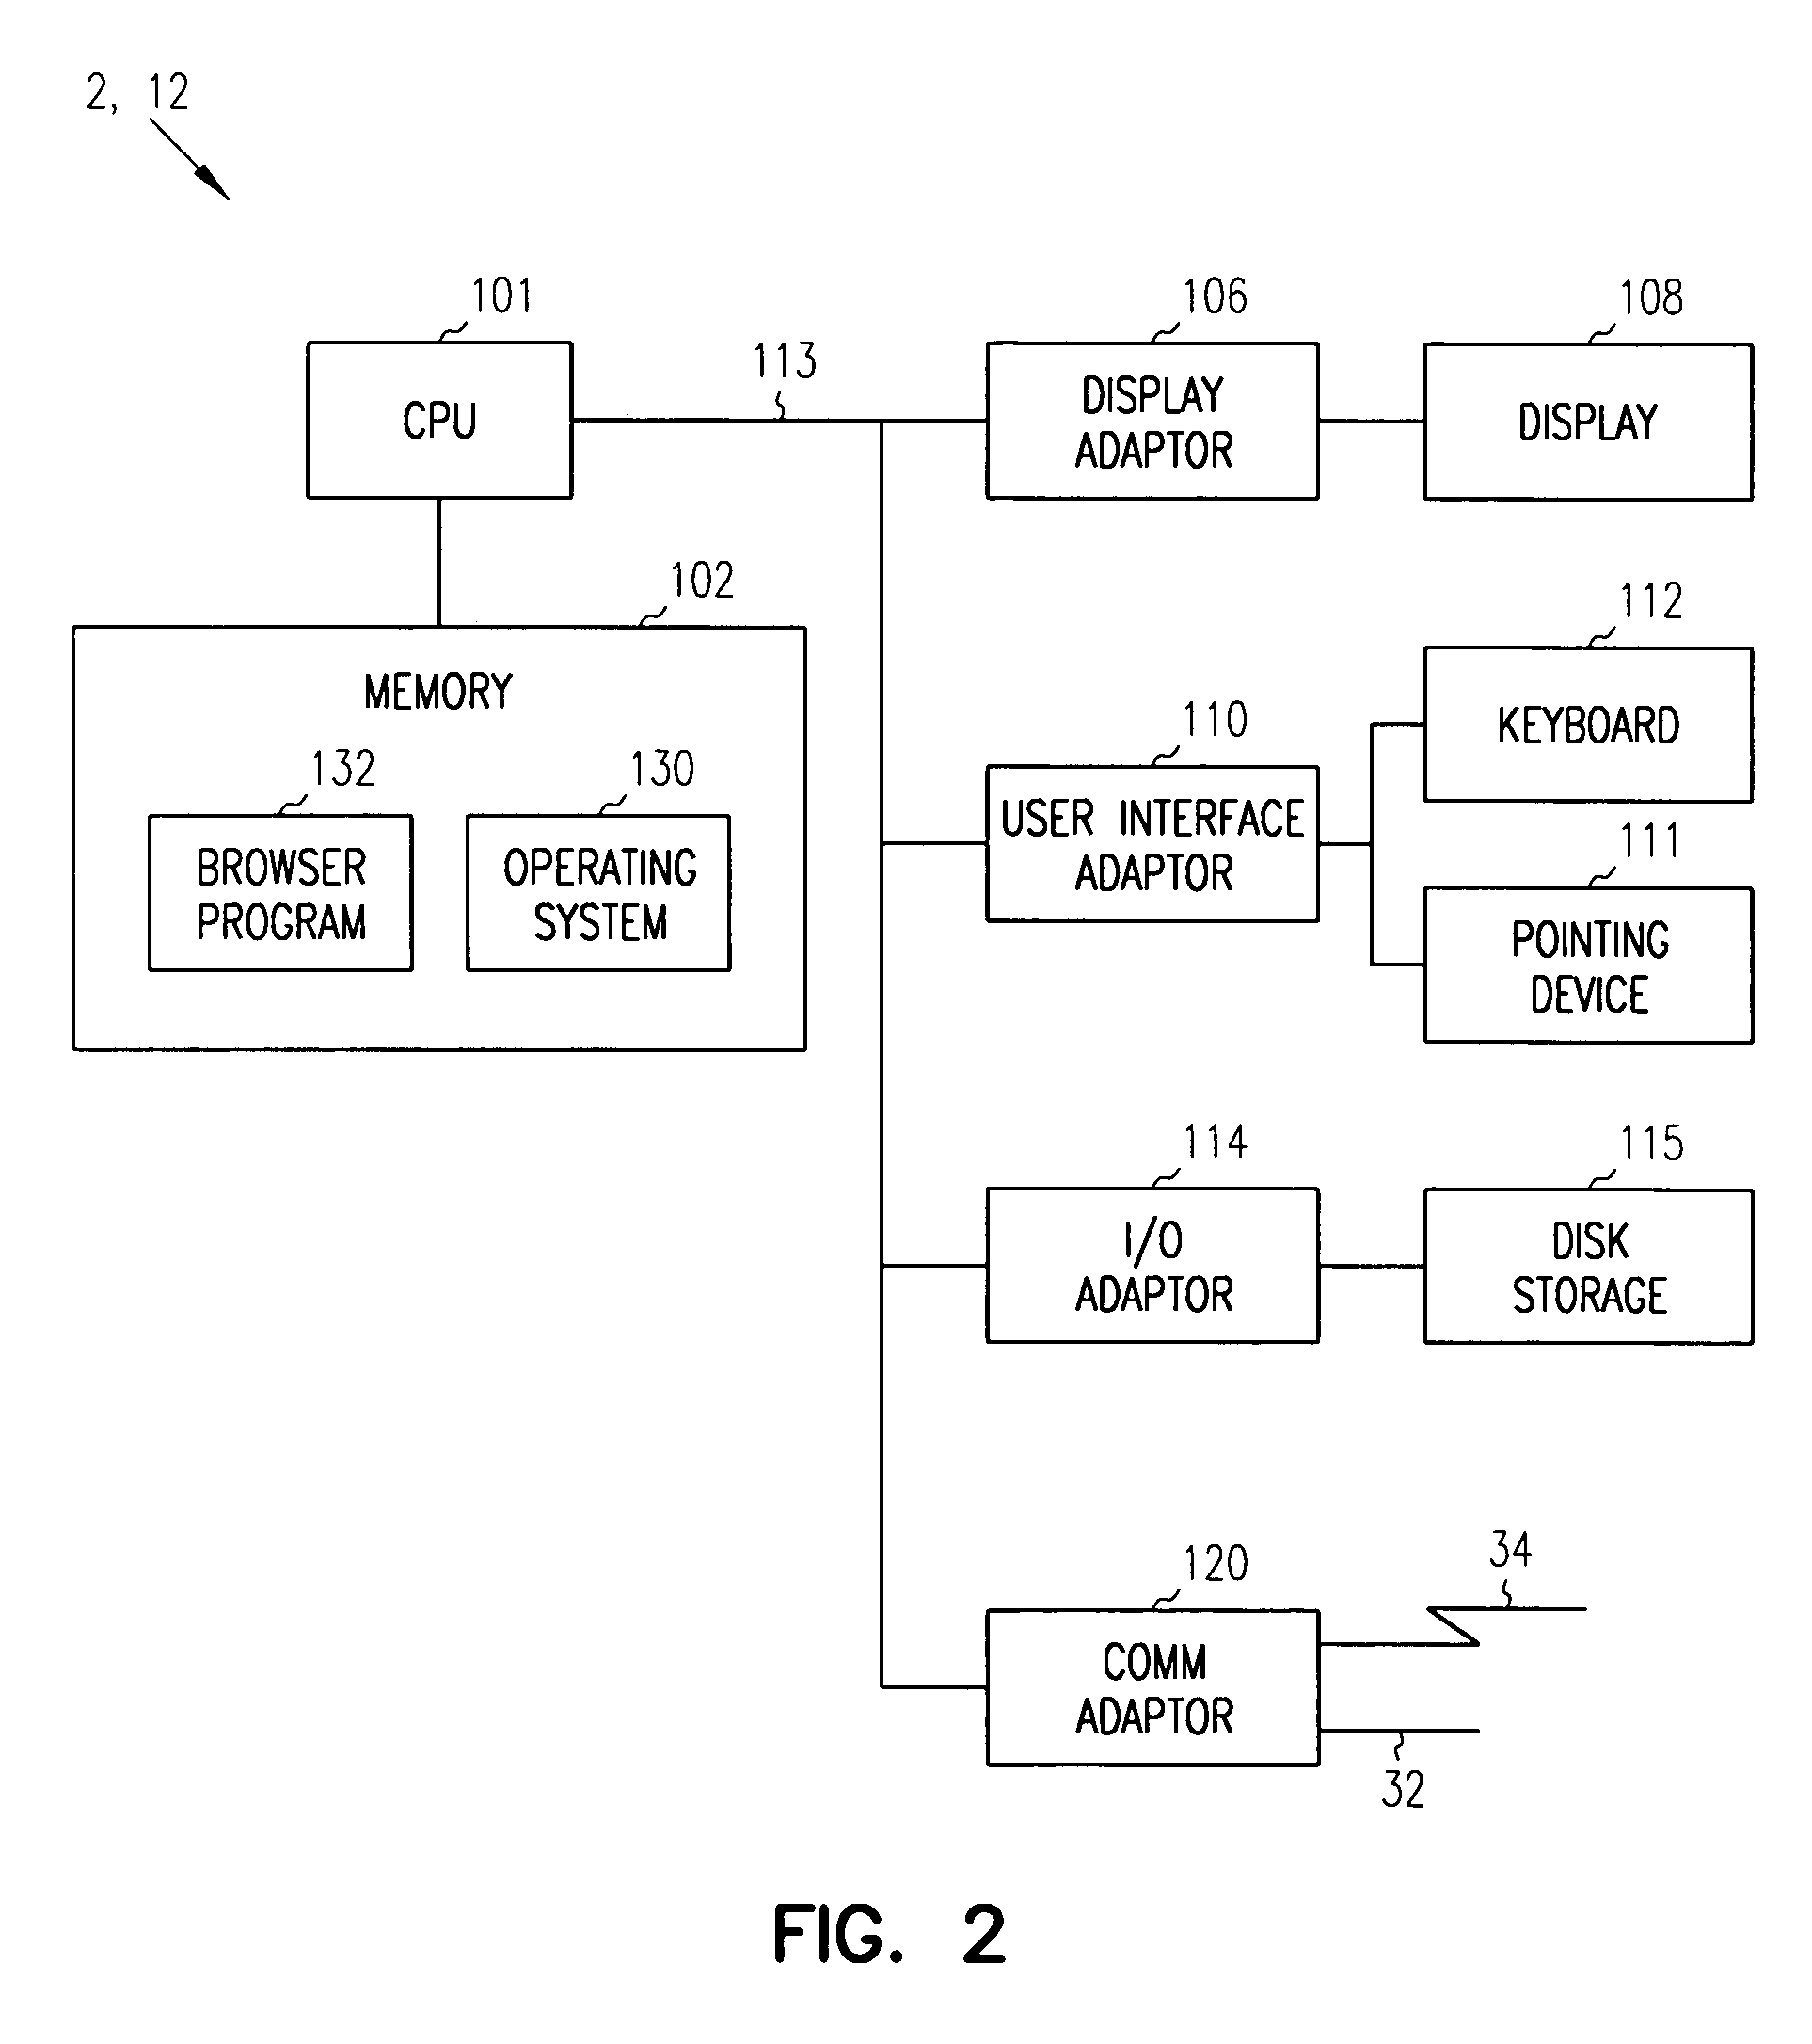 System and method for providing an intelligent multi-step dialog with a user